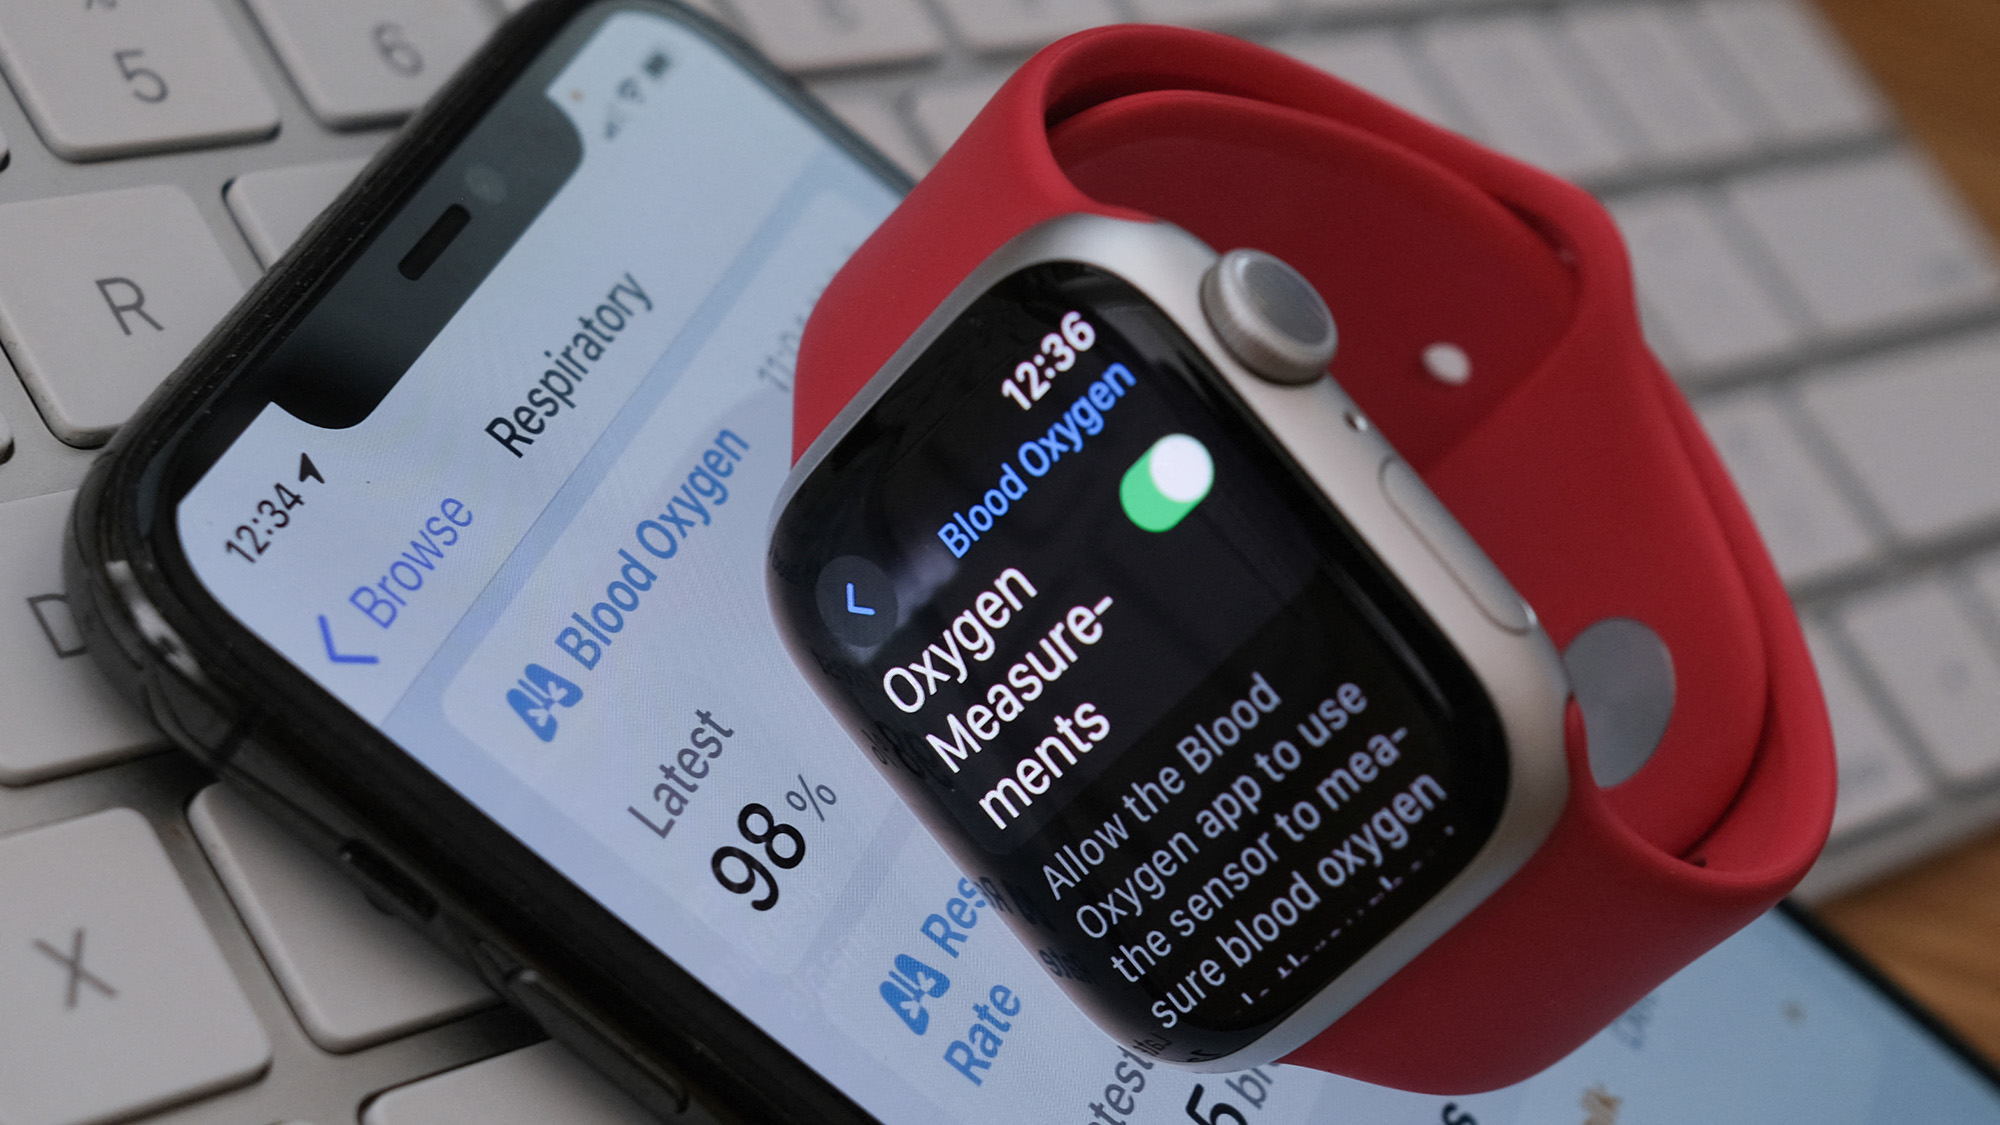 Apple may ditch controversial blood oxygen feature to avoid Watch ban